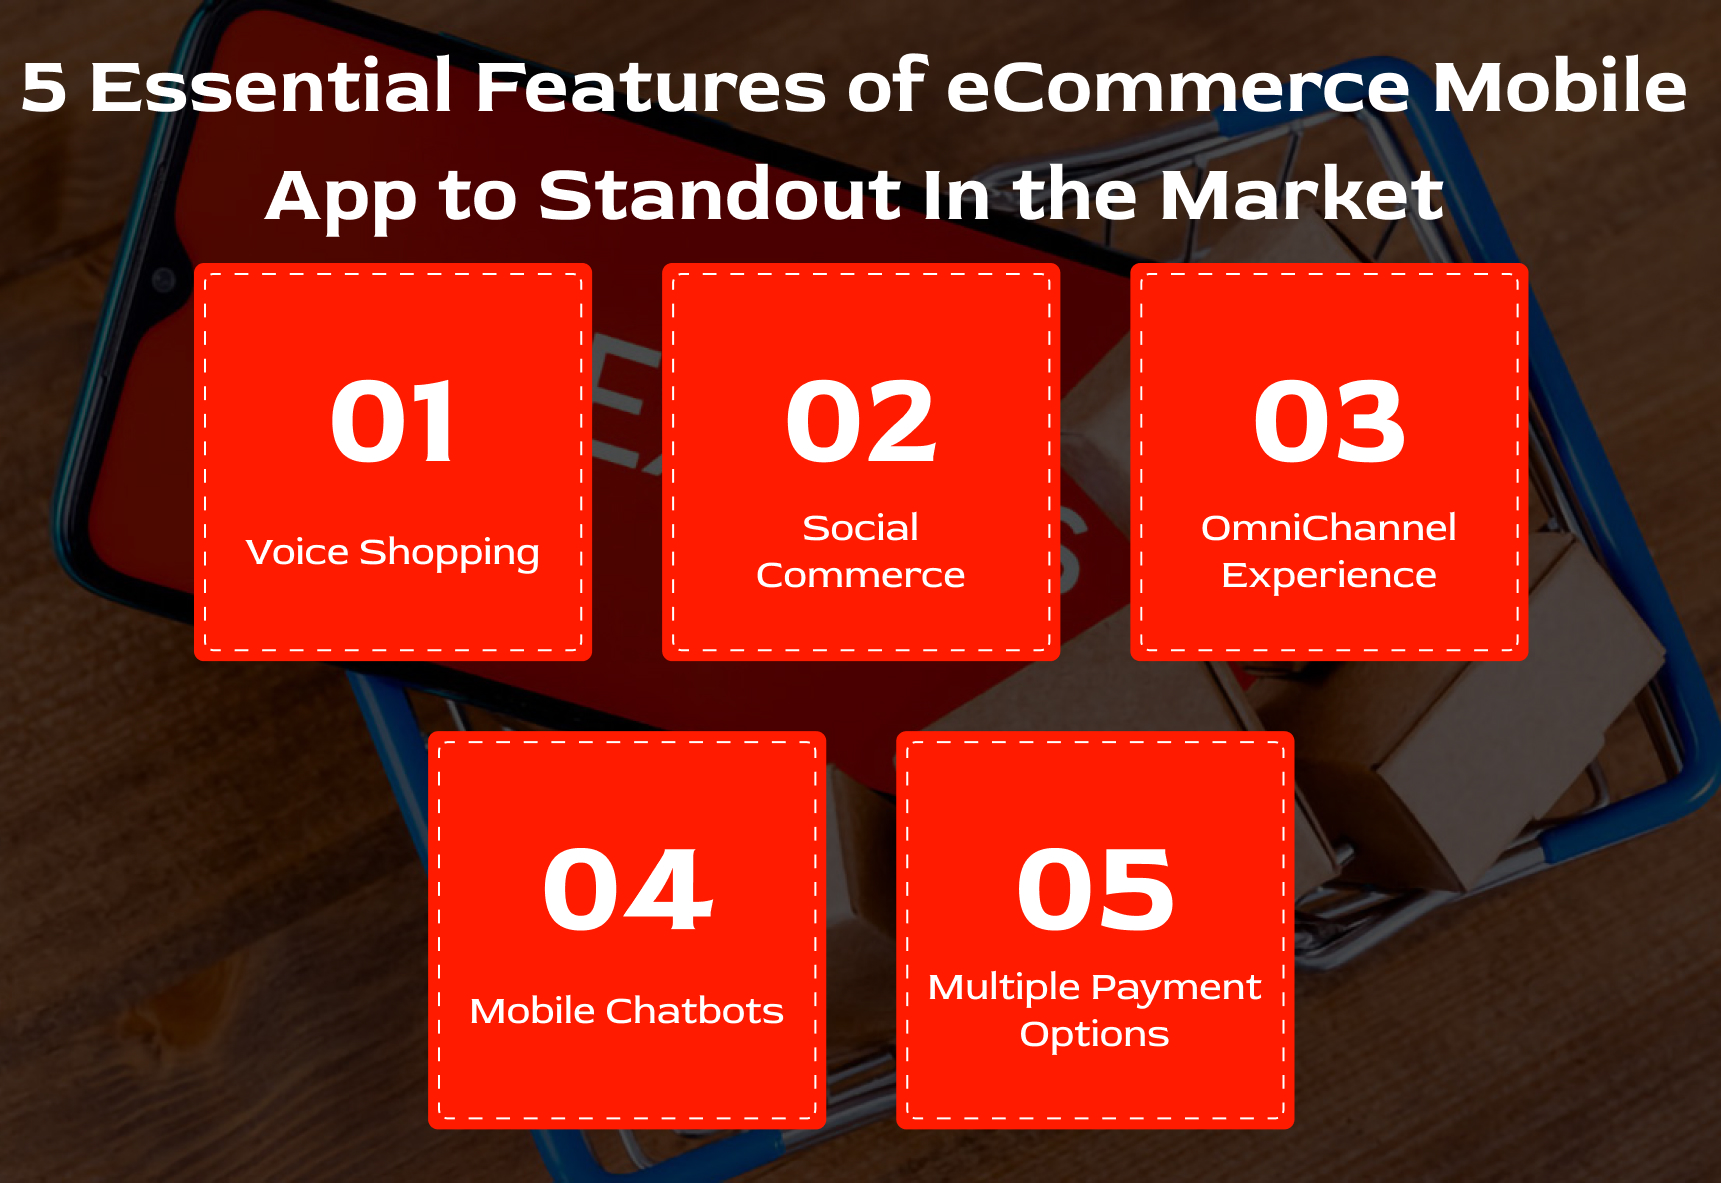 5 Essential Features of eCommerce Mobile App to Standout In the Market